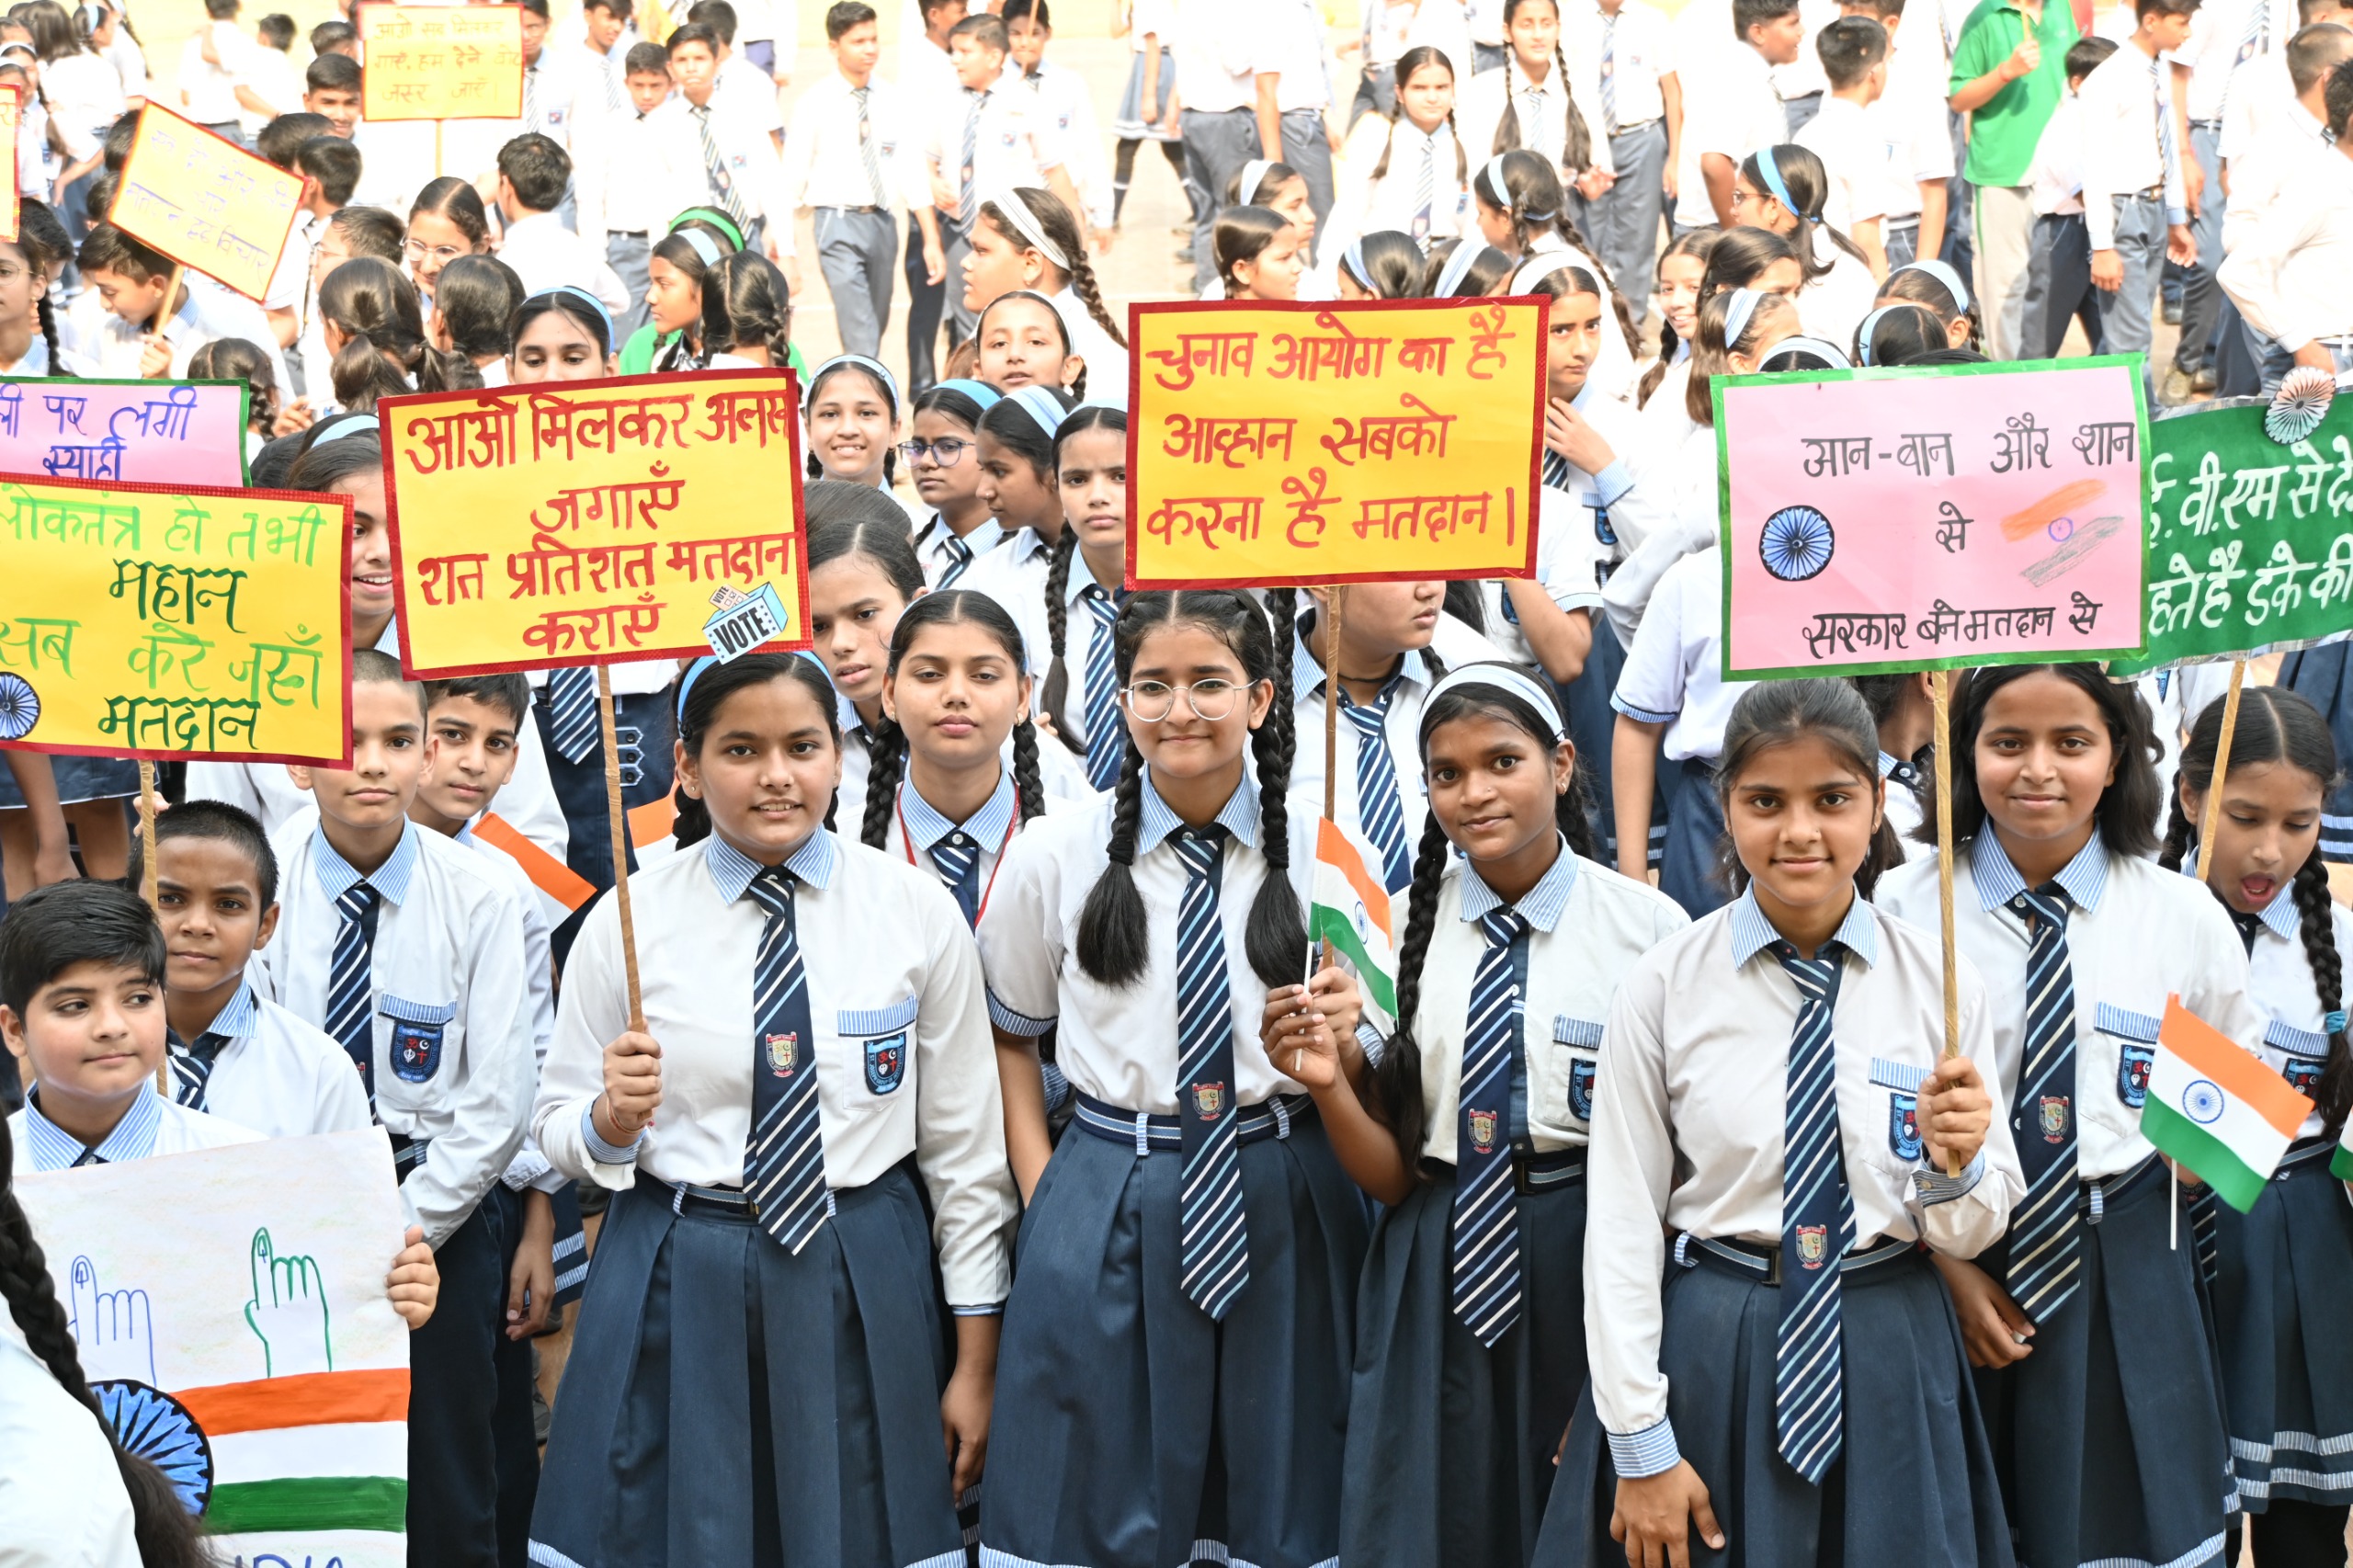 Children of St. Joseph's College located in Ruchikhand took out voter awareness rally.